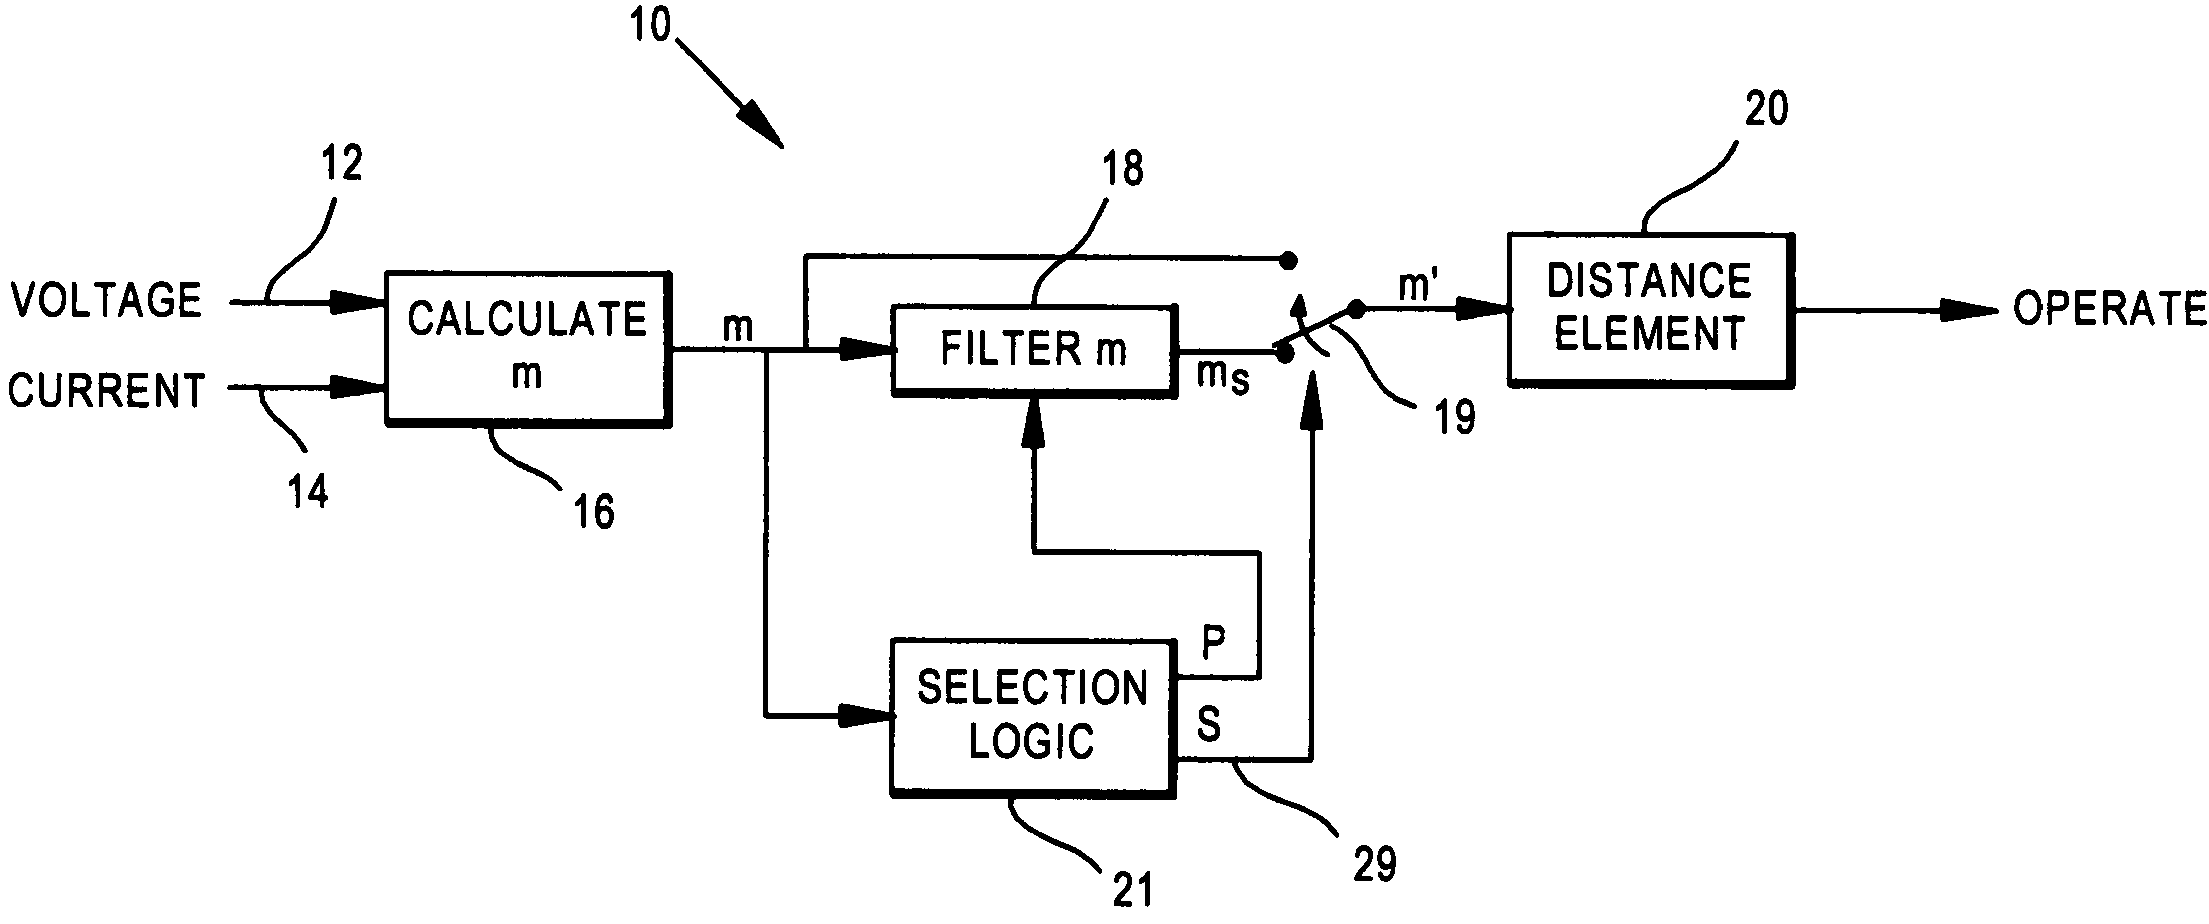 Protective relay for power systems having fault distance measurement filter logic